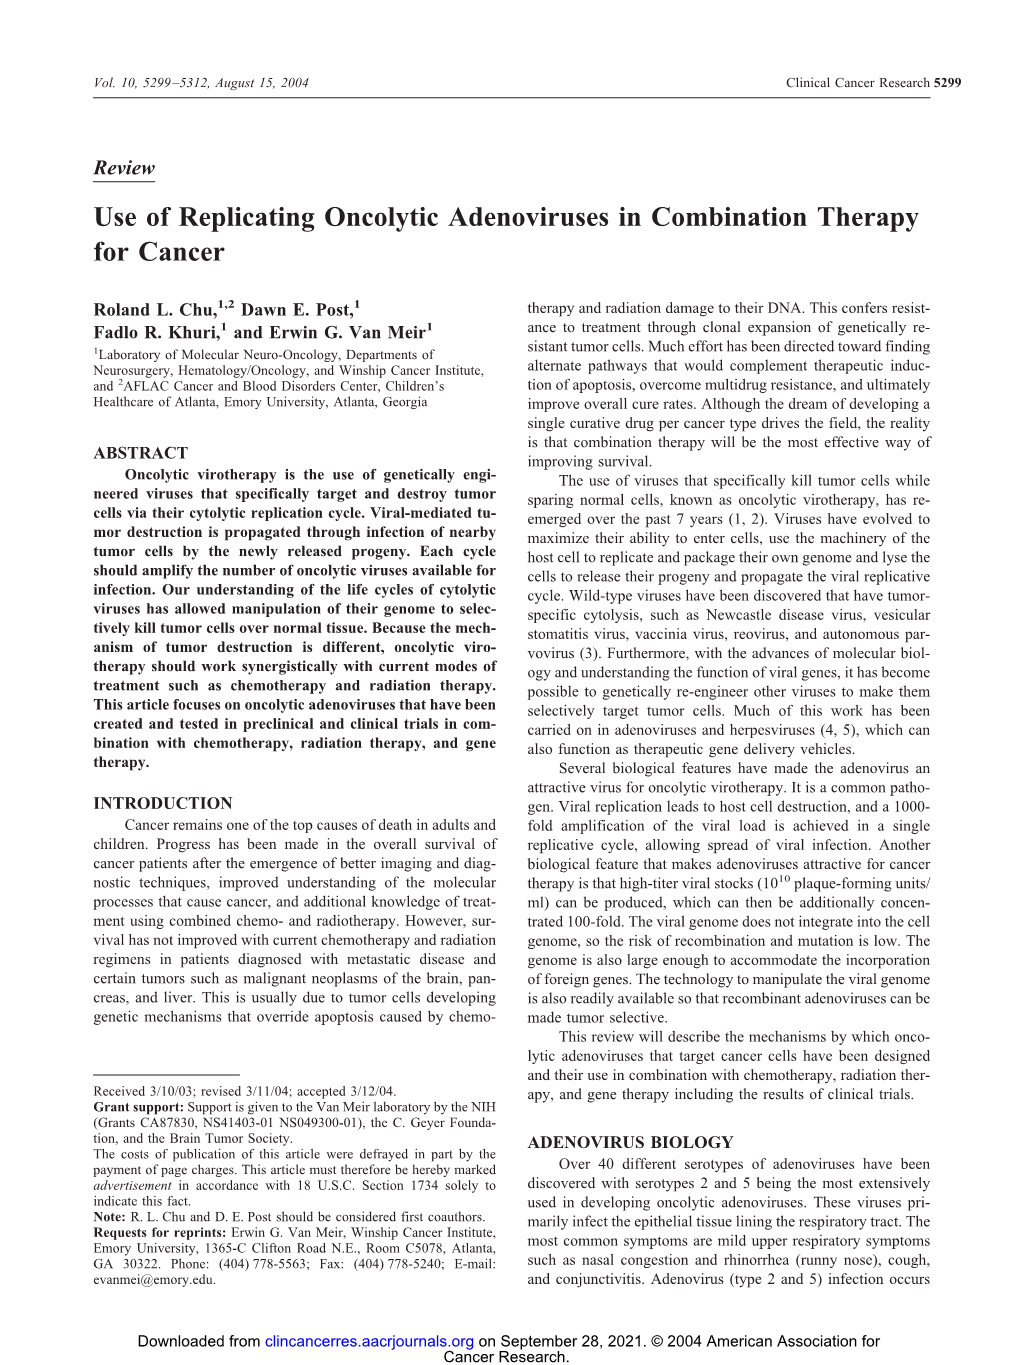 Use of Replicating Oncolytic Adenoviruses in Combination Therapy for Cancer